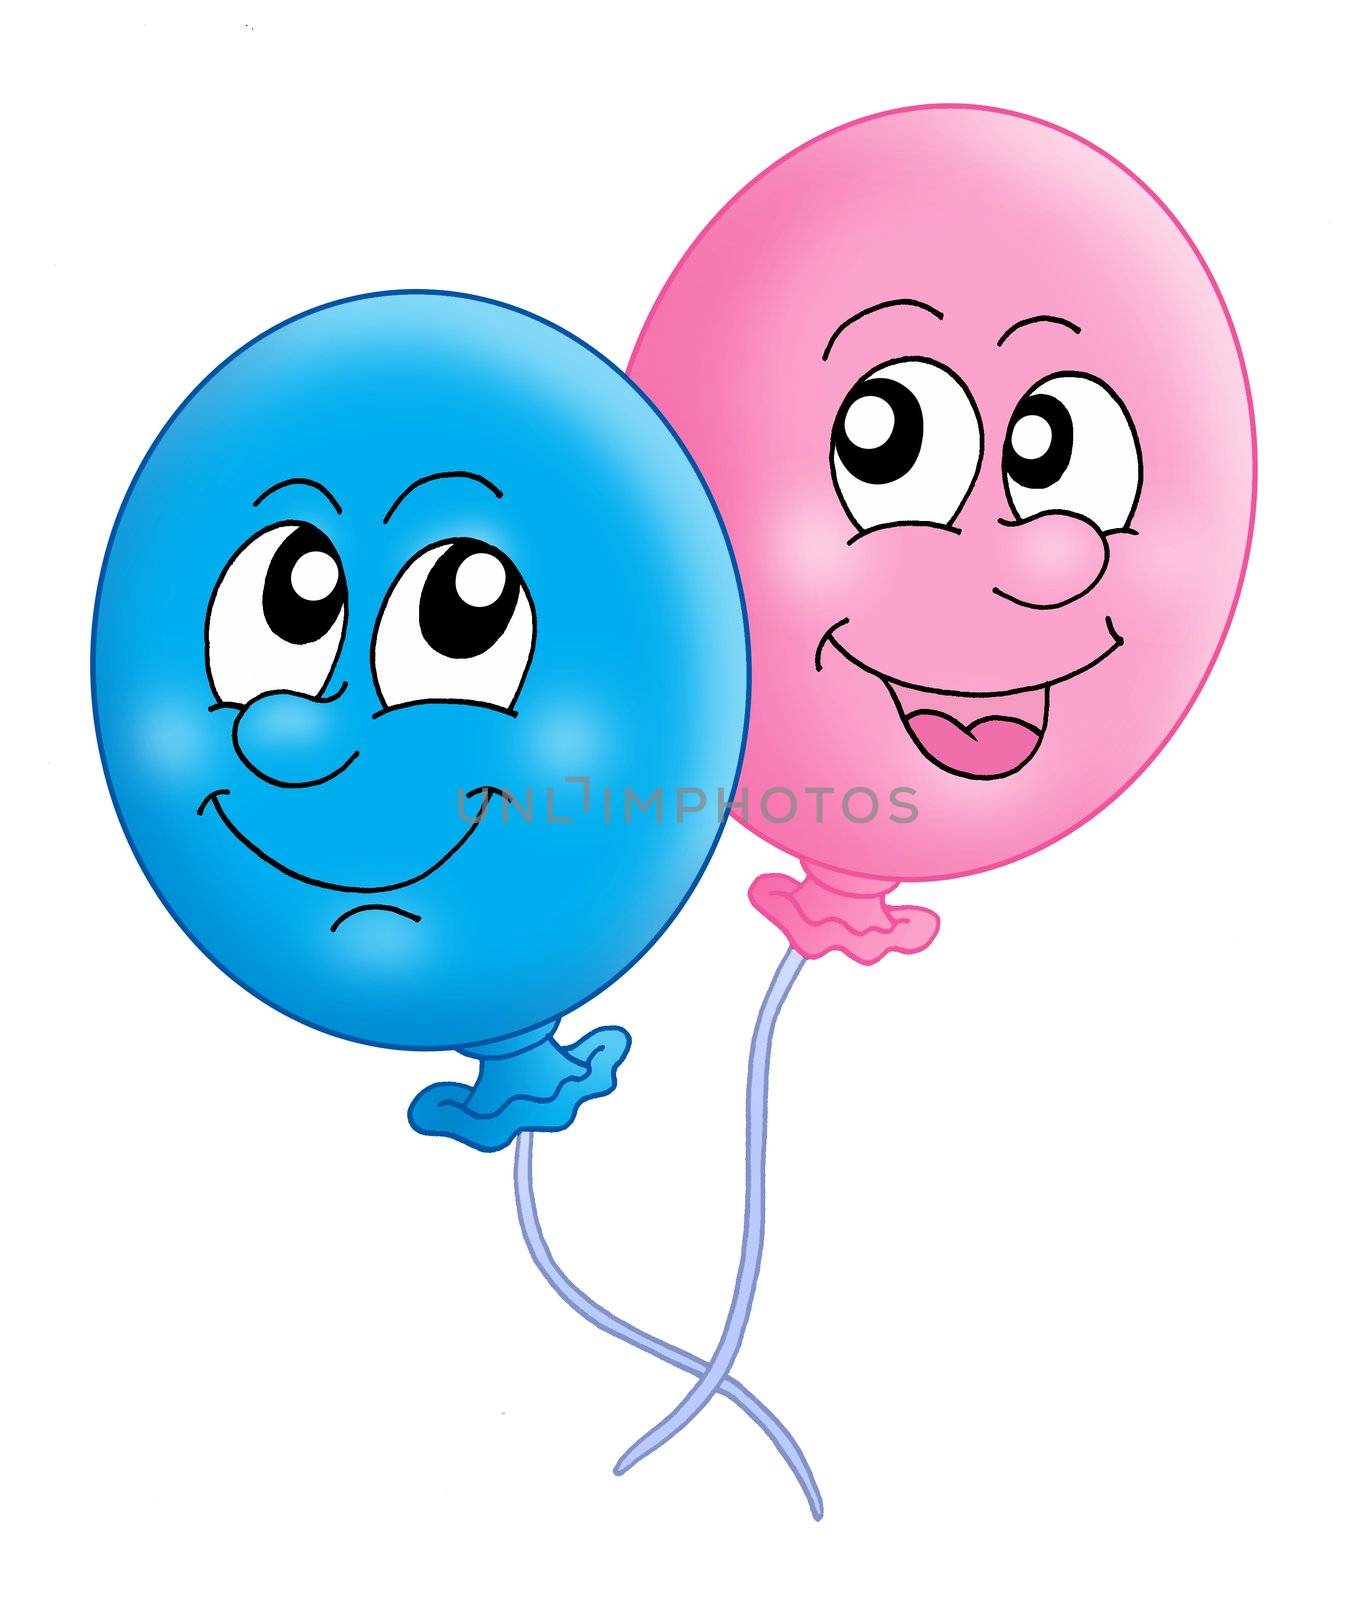 Pair of balloons by clairev